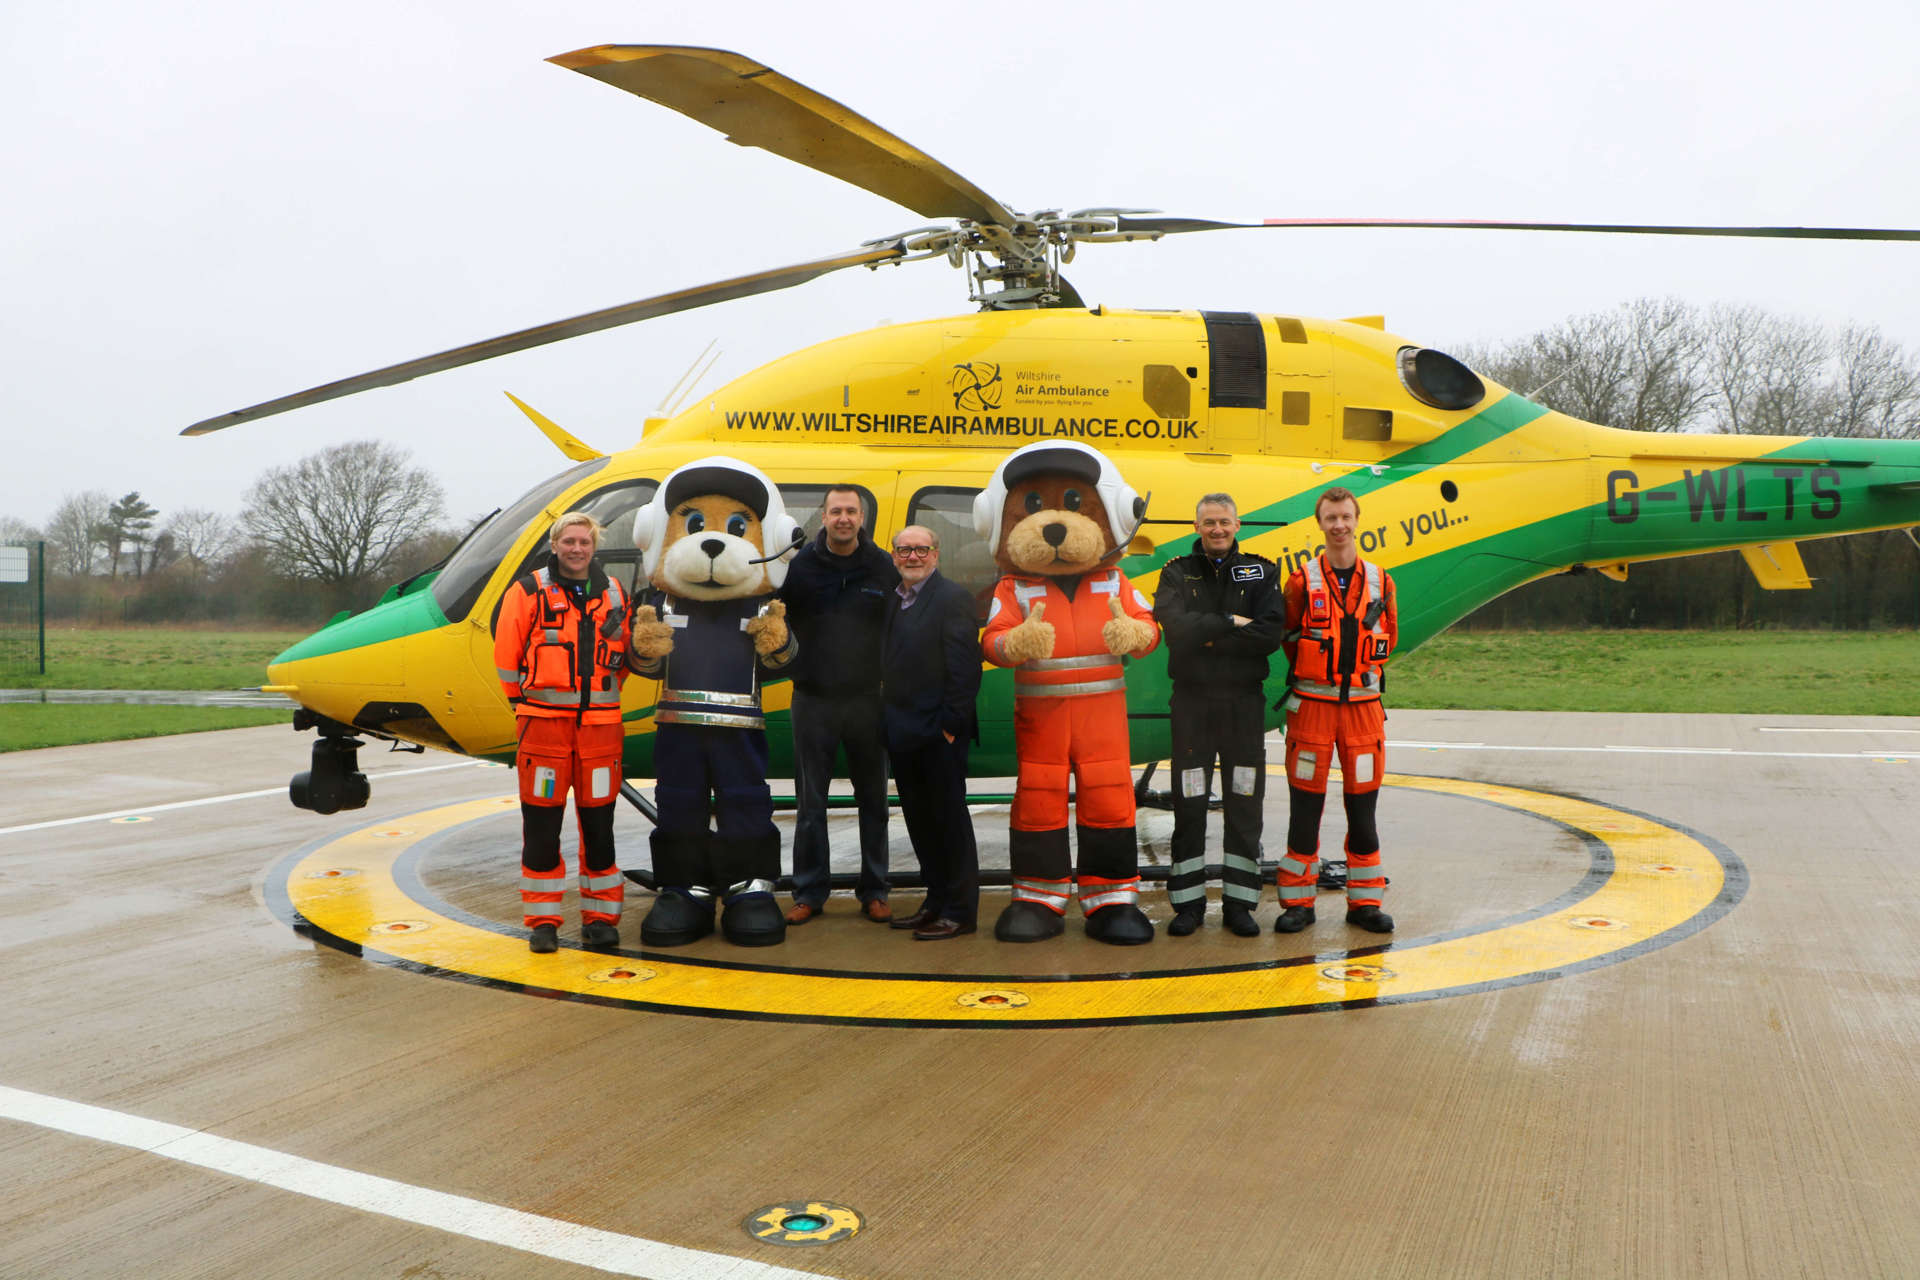 Mascot sponsor Soft Options photographed alongside two paramedics, a pilot and our two charity bear mascots Wilber and Marsha.